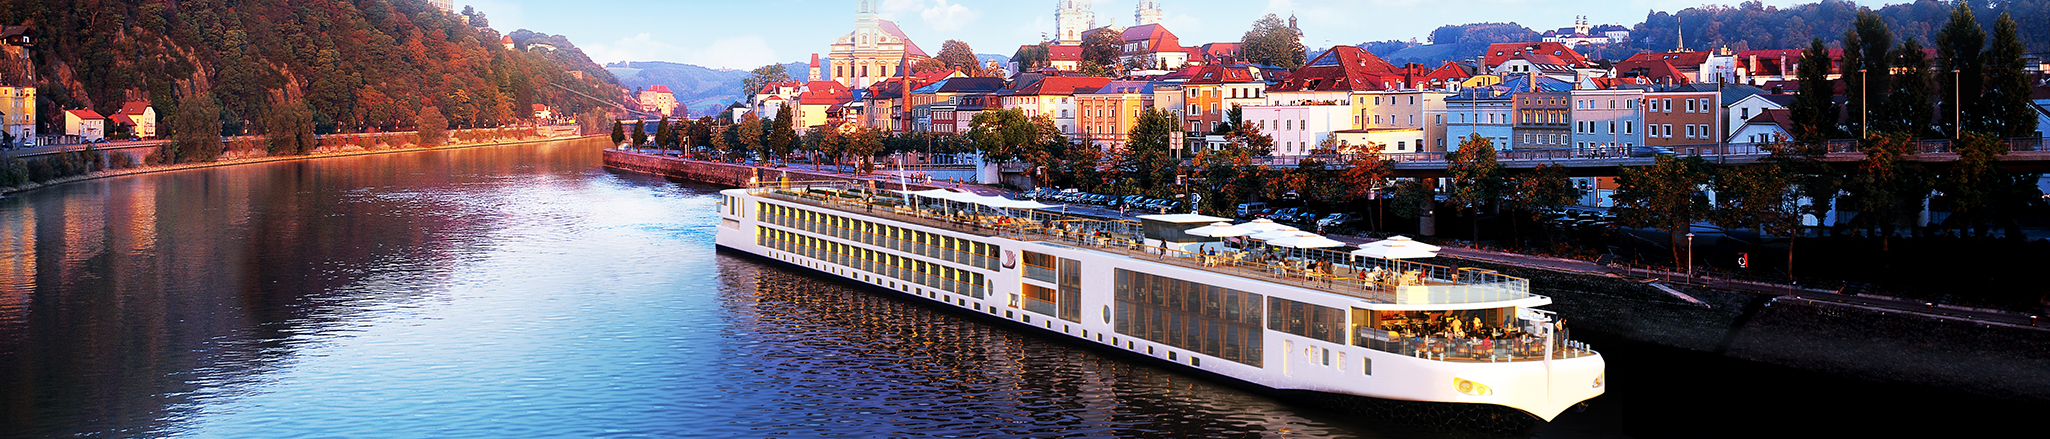 River Cruise Deal